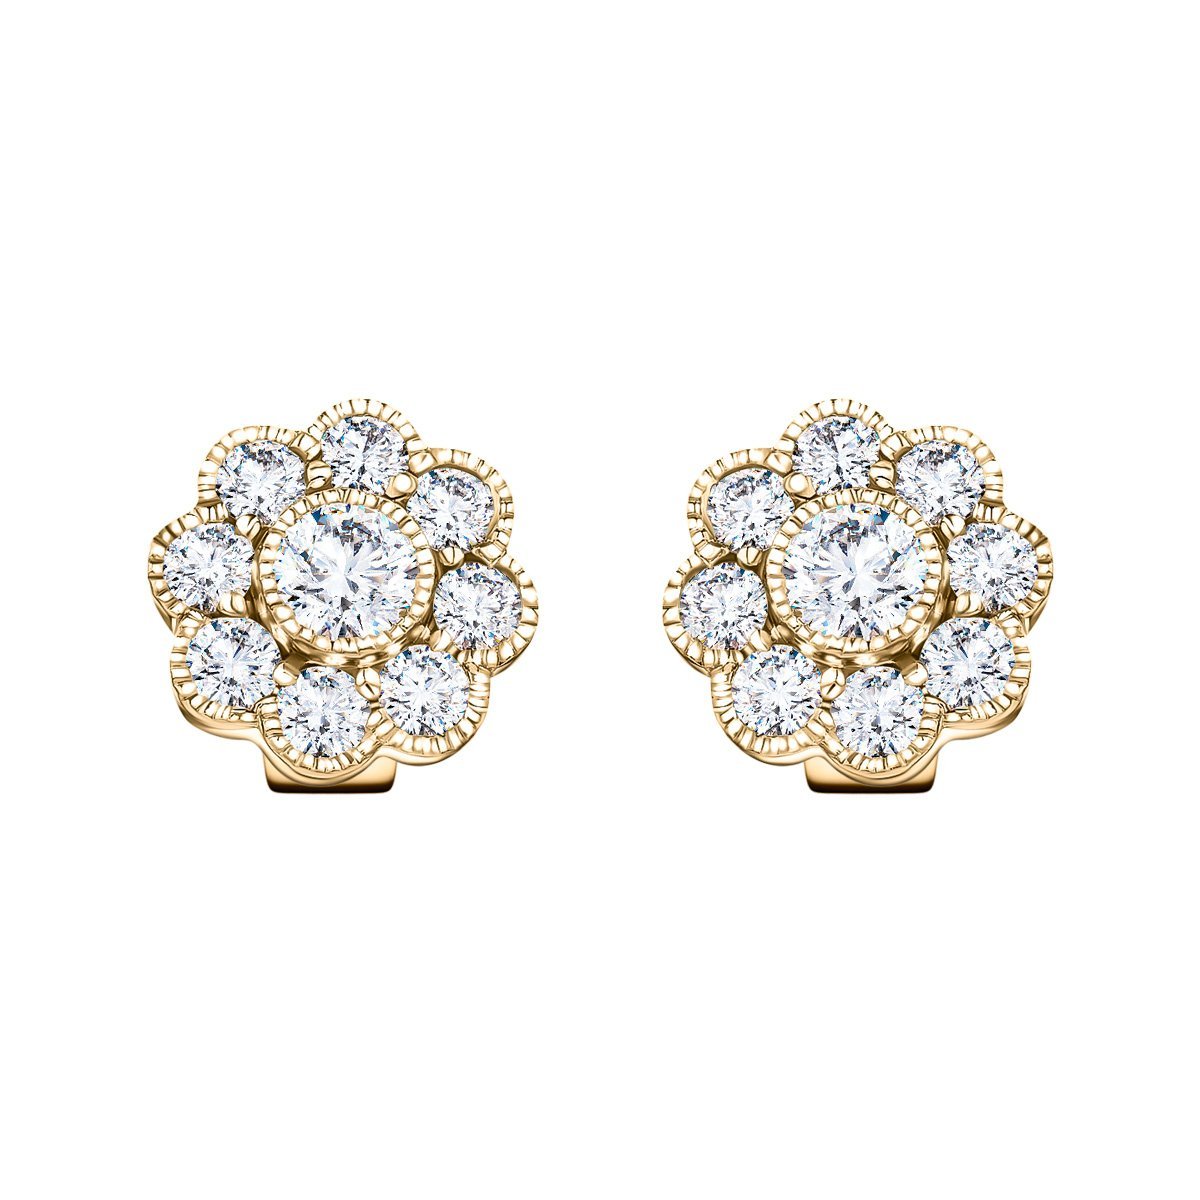 Cluster Earrings 1.10ct G/SI Quality Diamond in 18k Yellow Gold - All Diamond